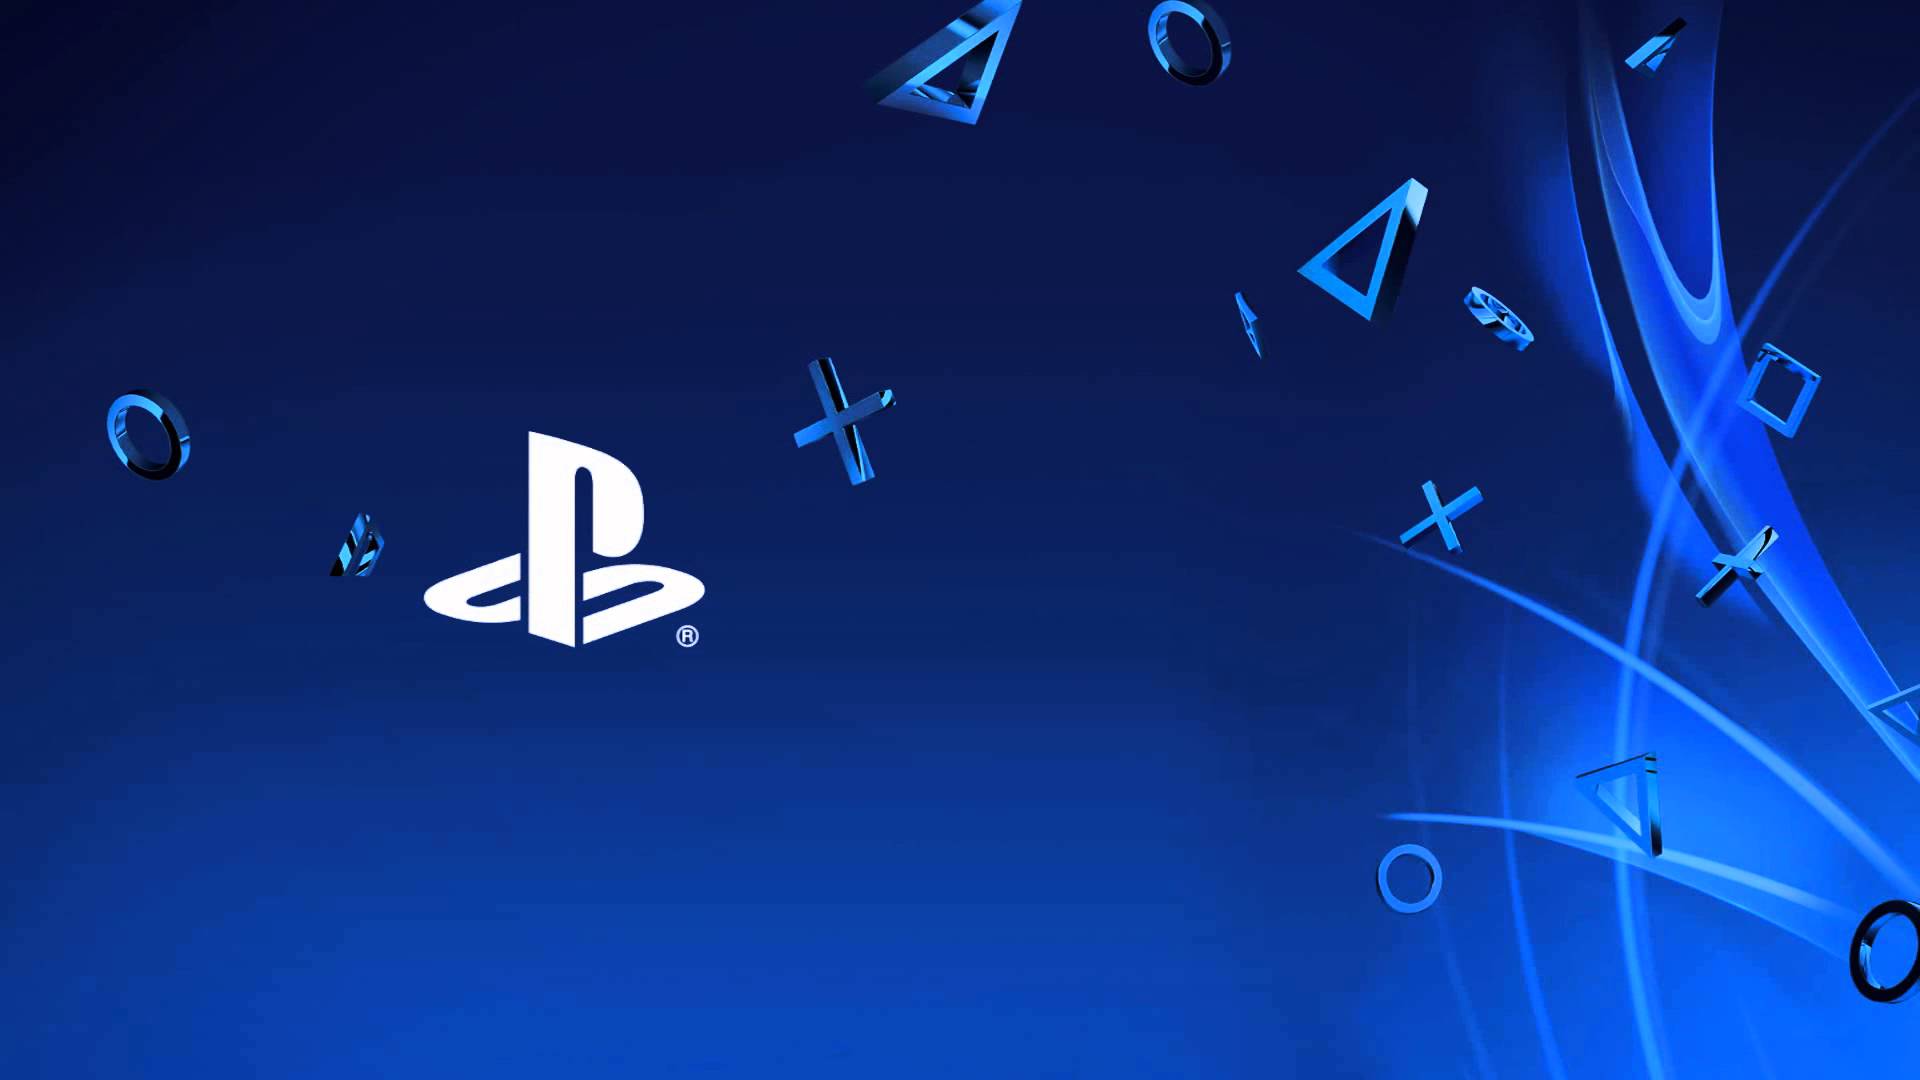 Ps4 Wallpapers Group 74 Images, Photos, Reviews